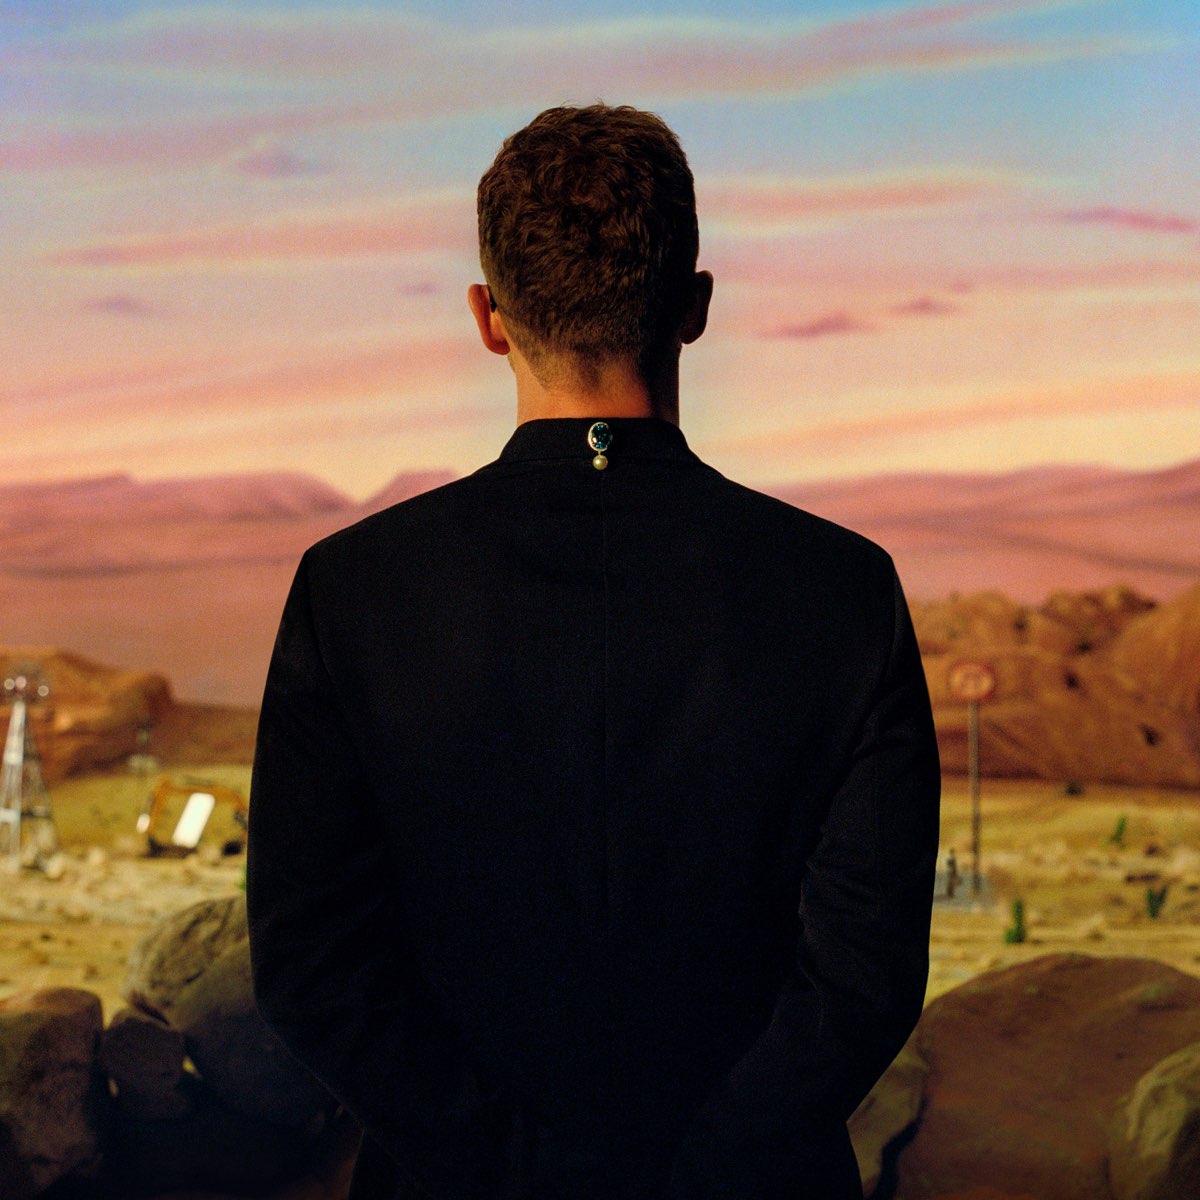 audio review : Everything I Thought It Was ( album ) ... Justin Timberlake